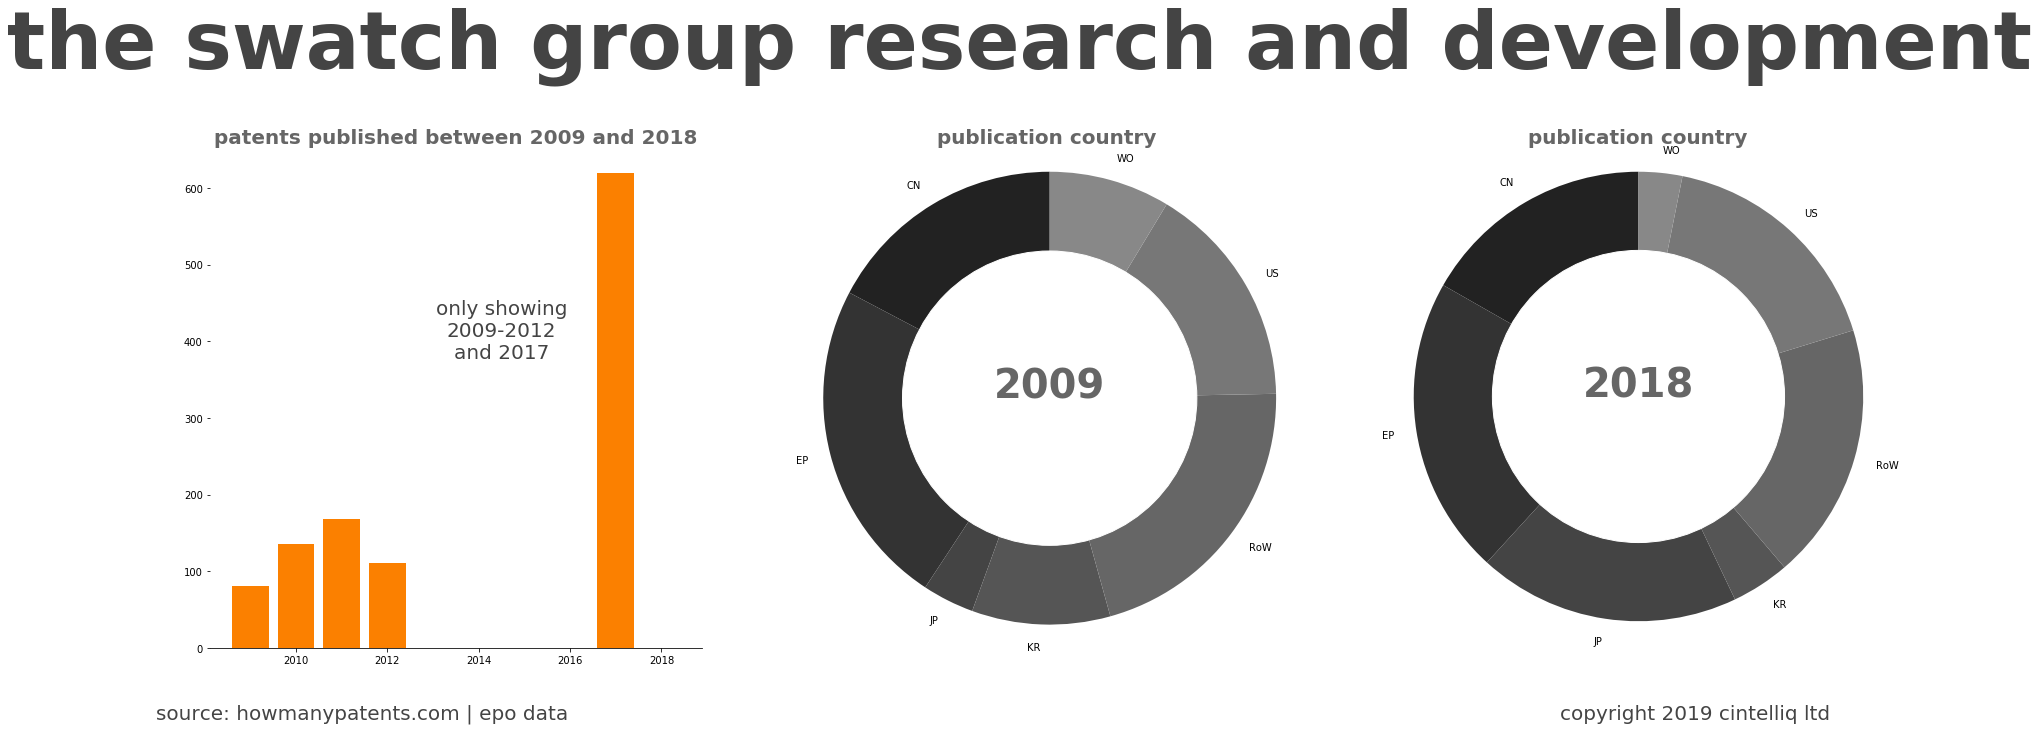 summary of patents for The Swatch Group Research And Development